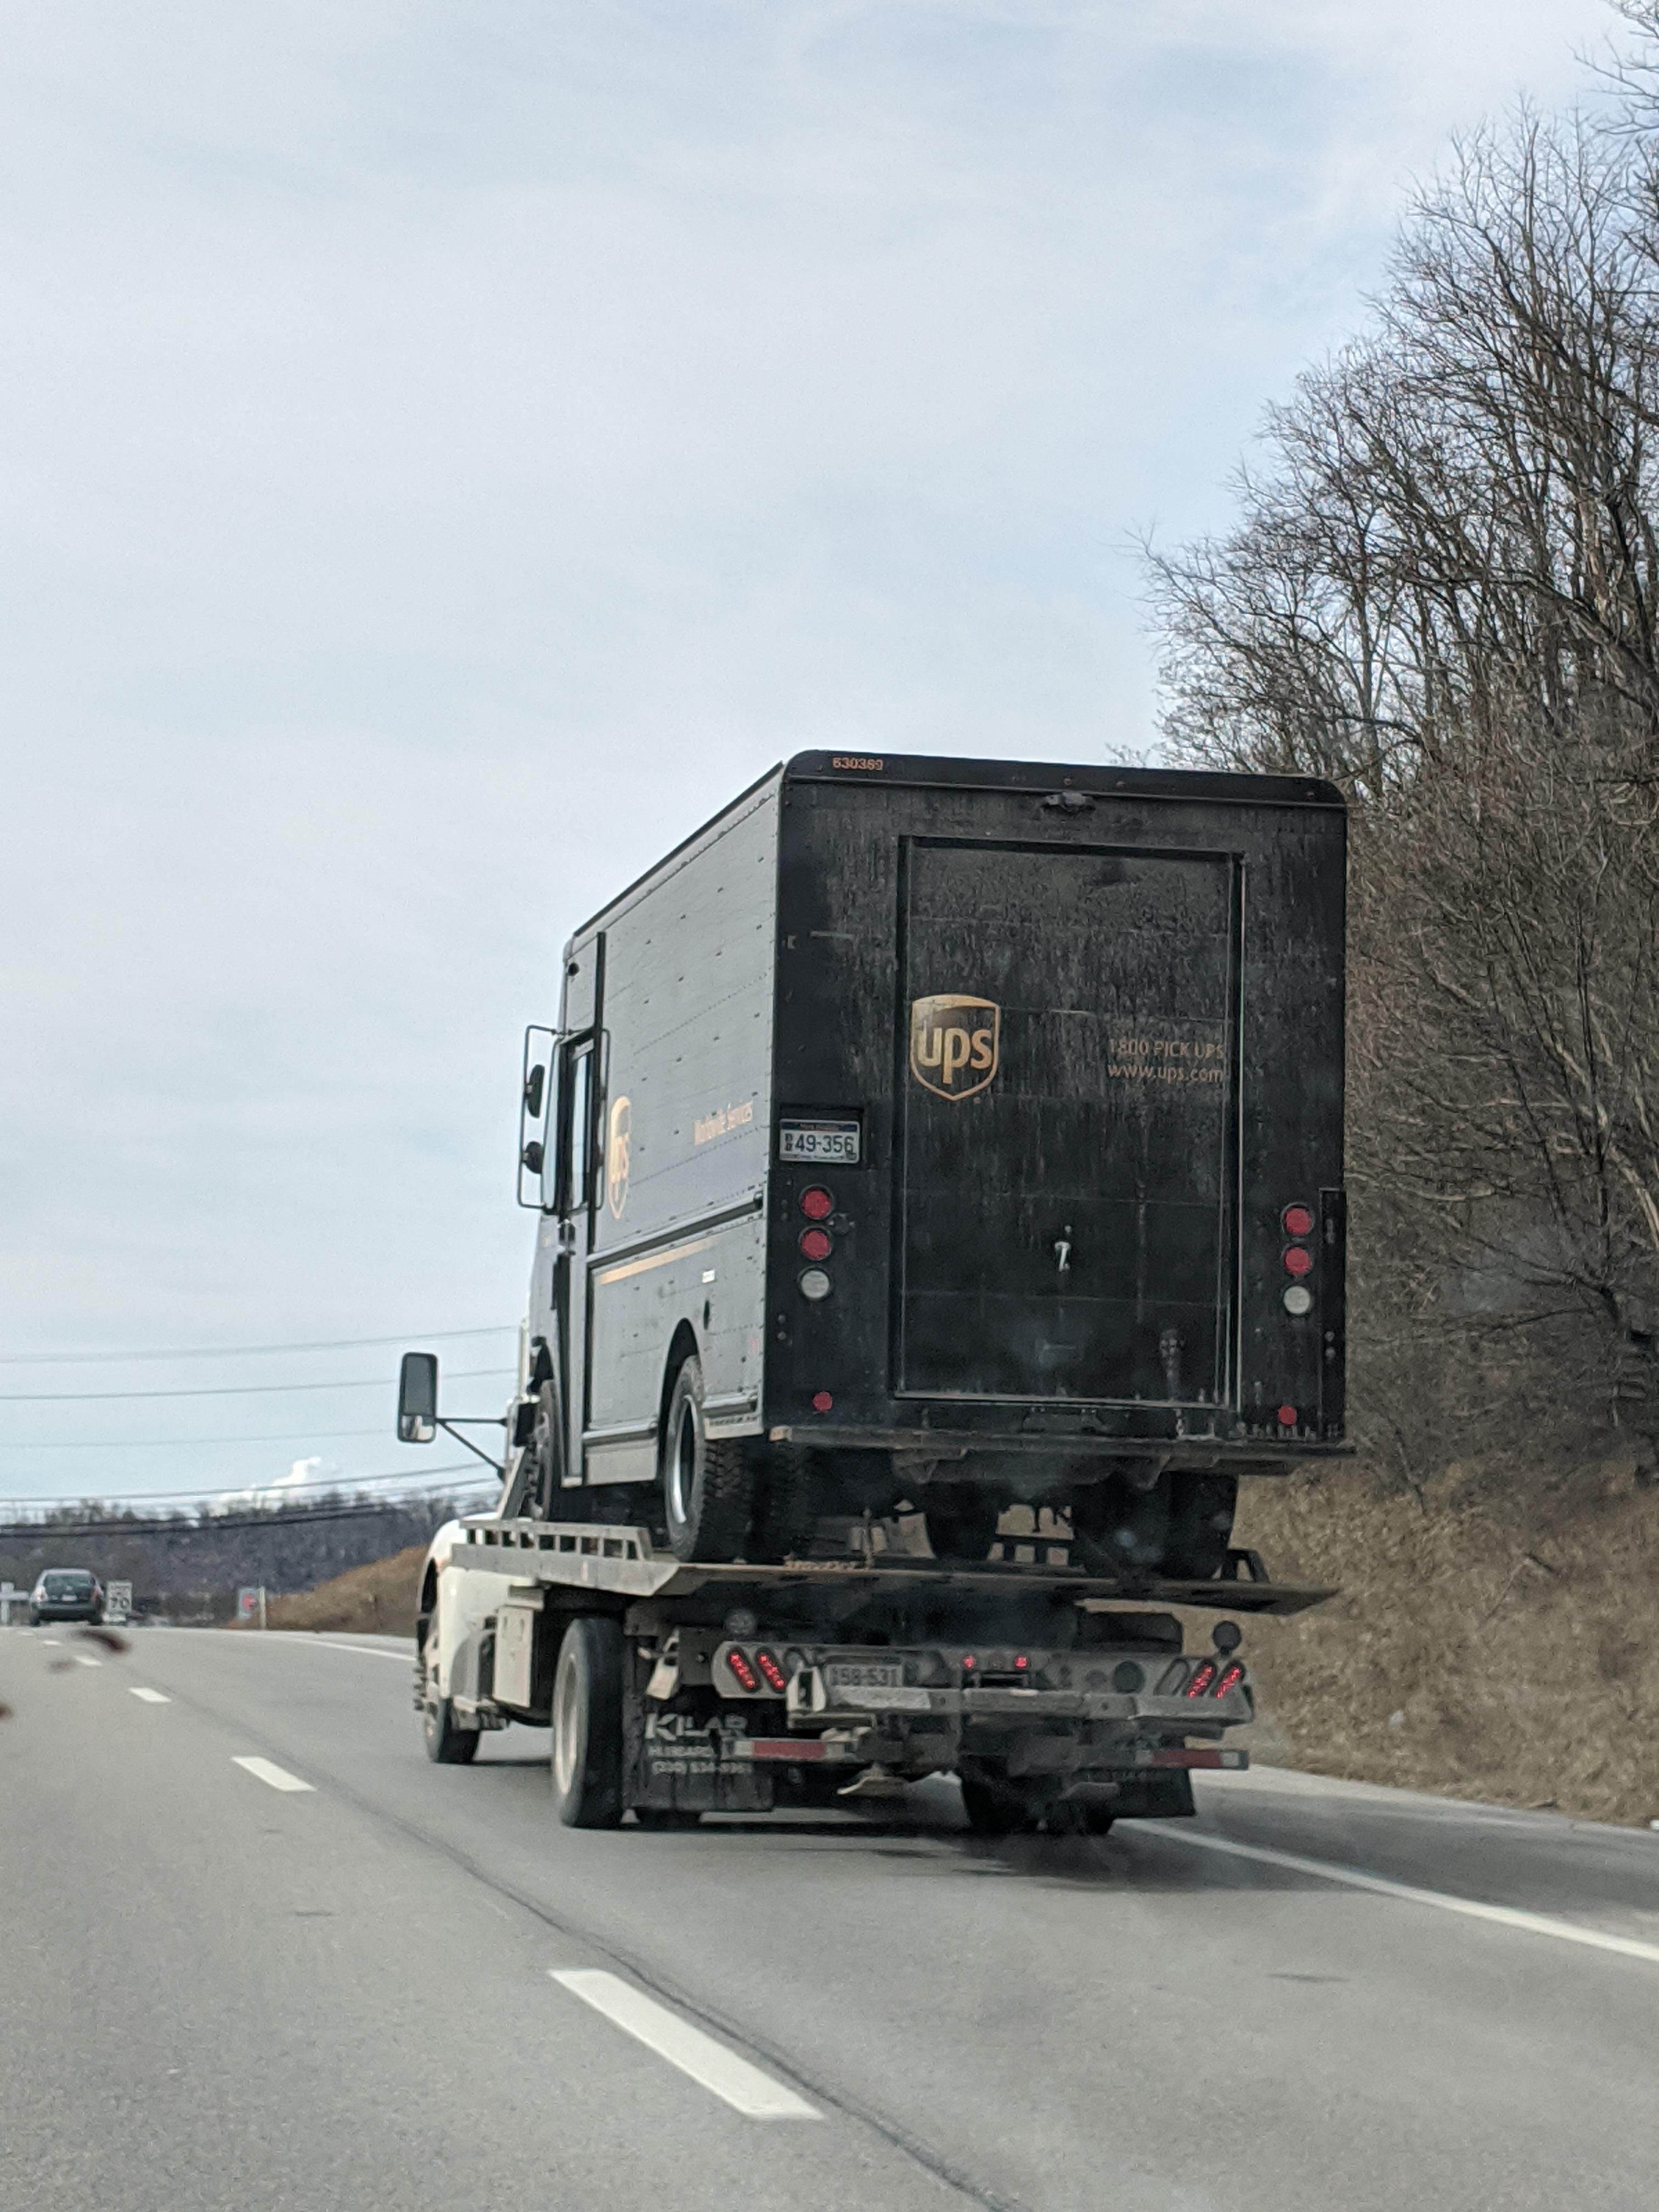 Your package of "A UPS Truck" has shipped.